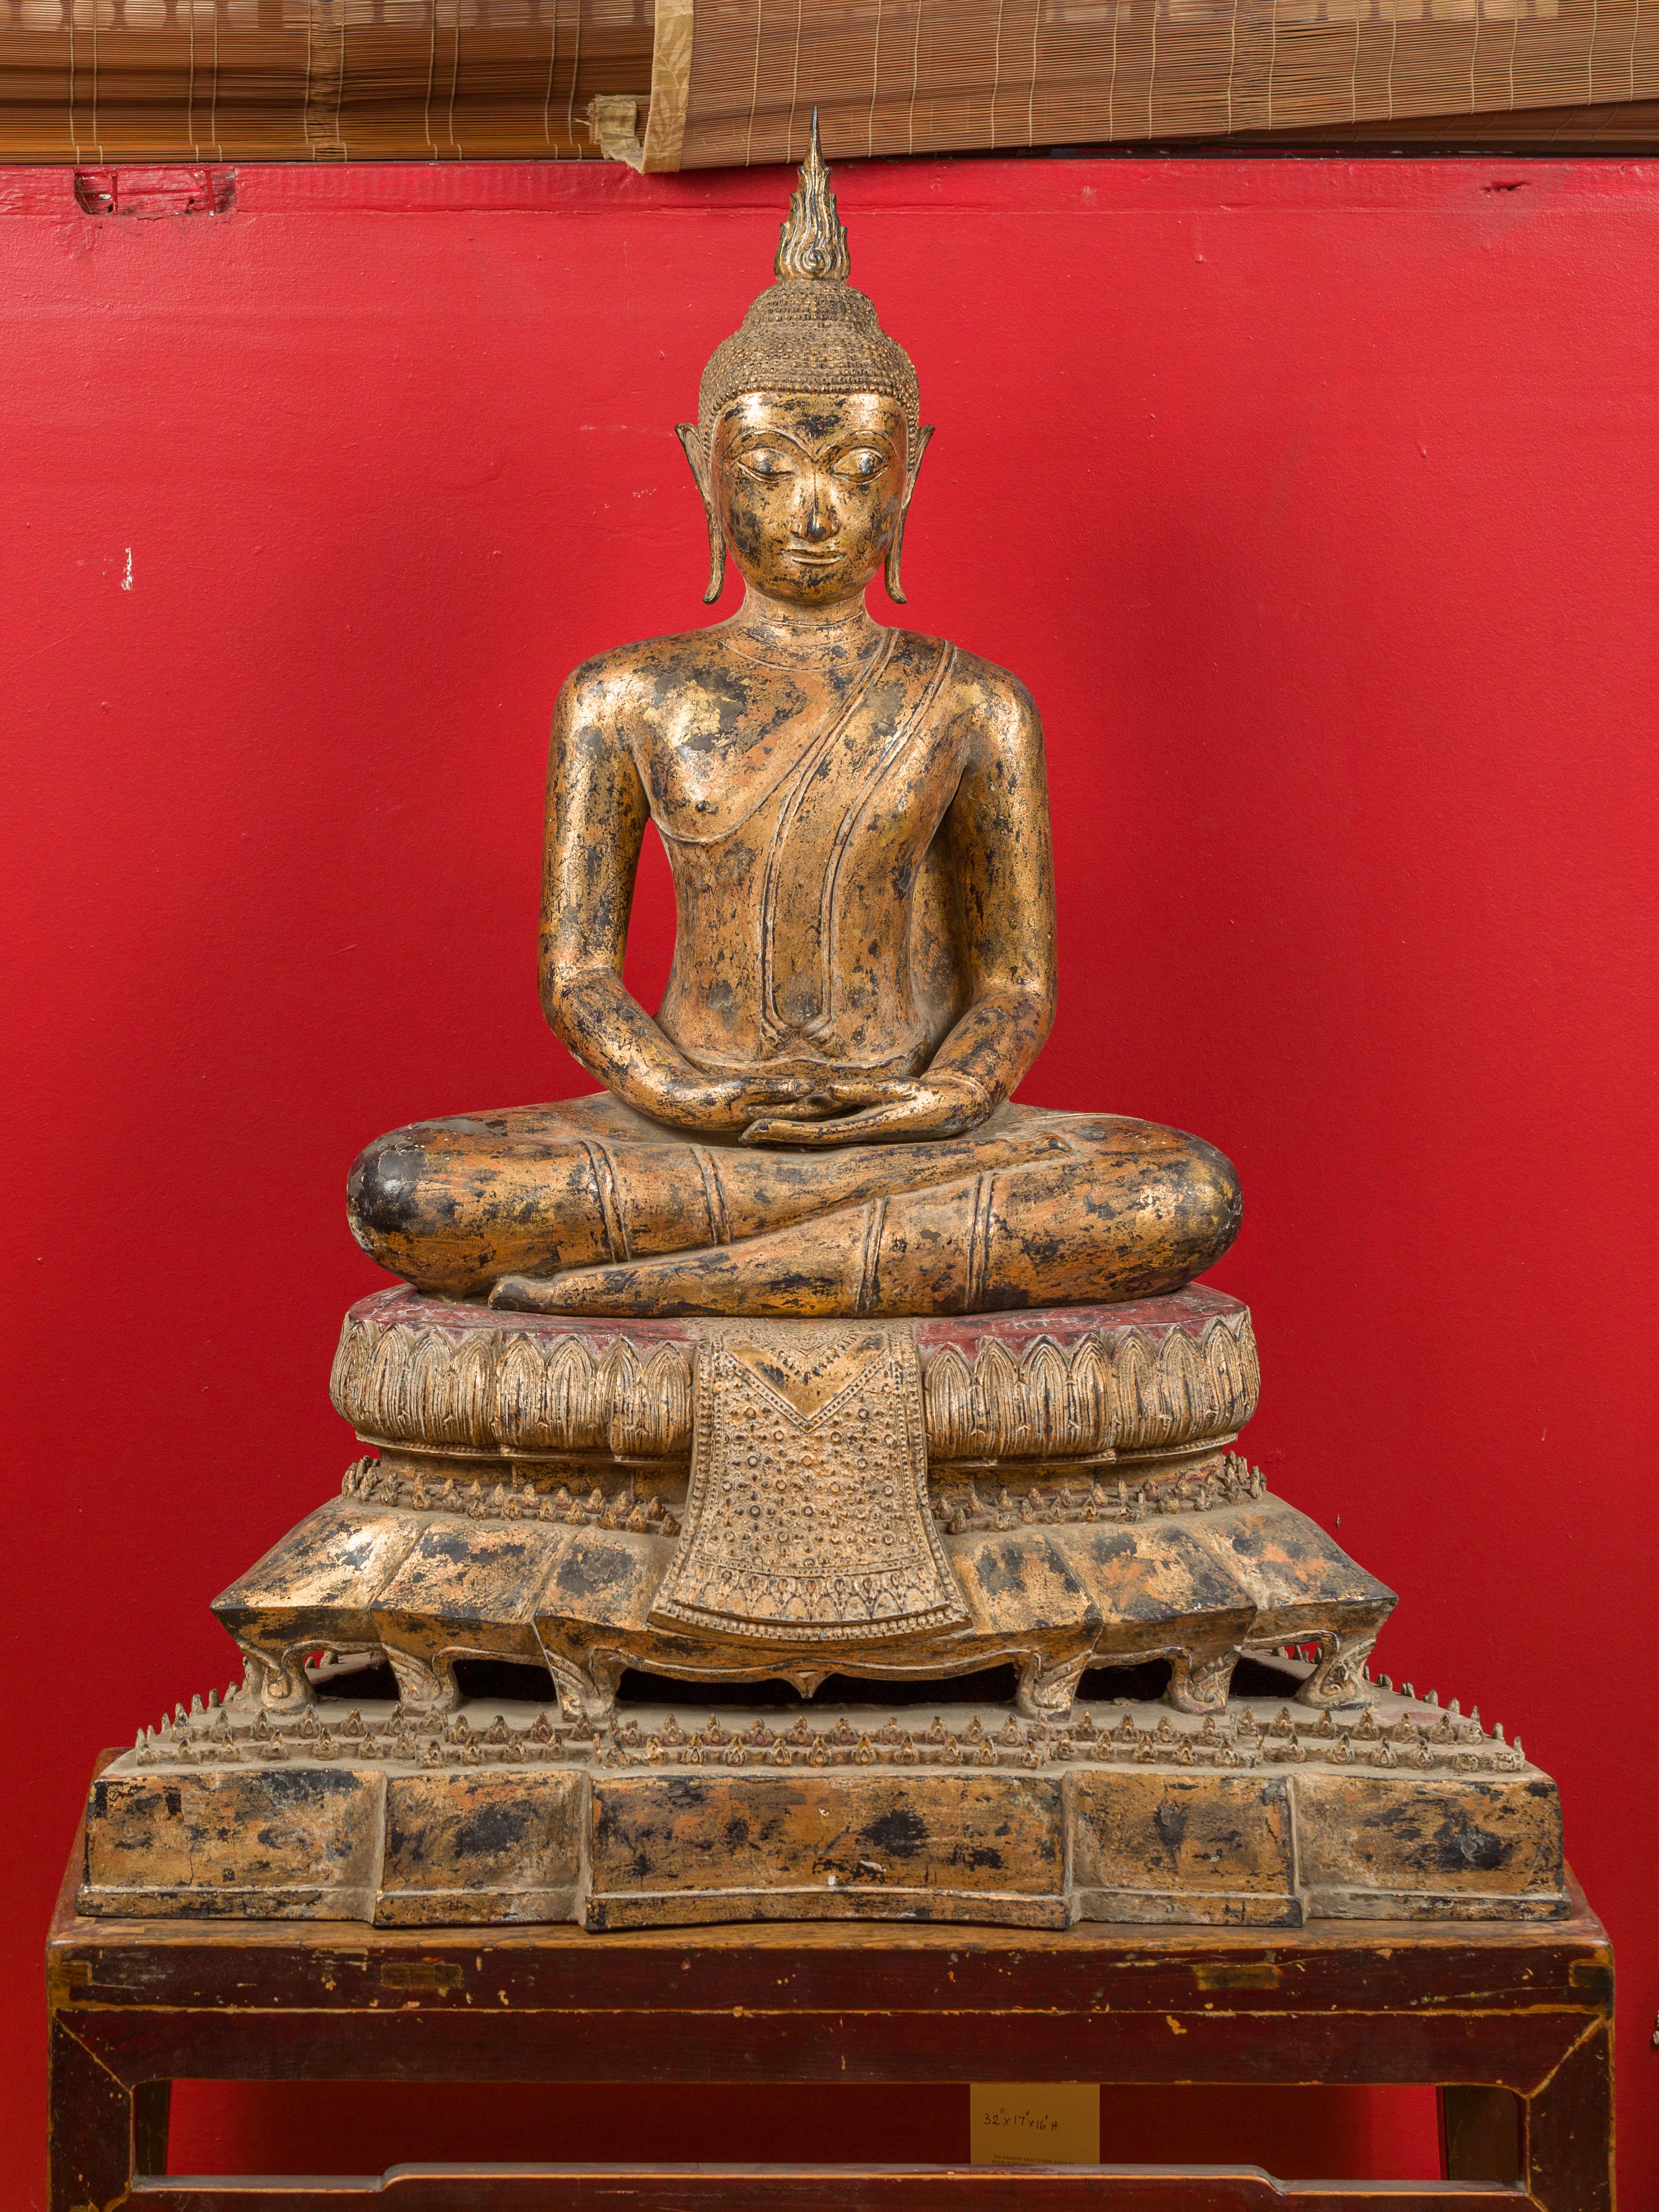 A Thai Bangkok period seated Buddha statue from the late 18th century, handcrafted out of bronze and gilded. Born in Thailand during the 1780s, this tall statue features a seated, meditative Buddha, accented with exquisite details. The pedestal in